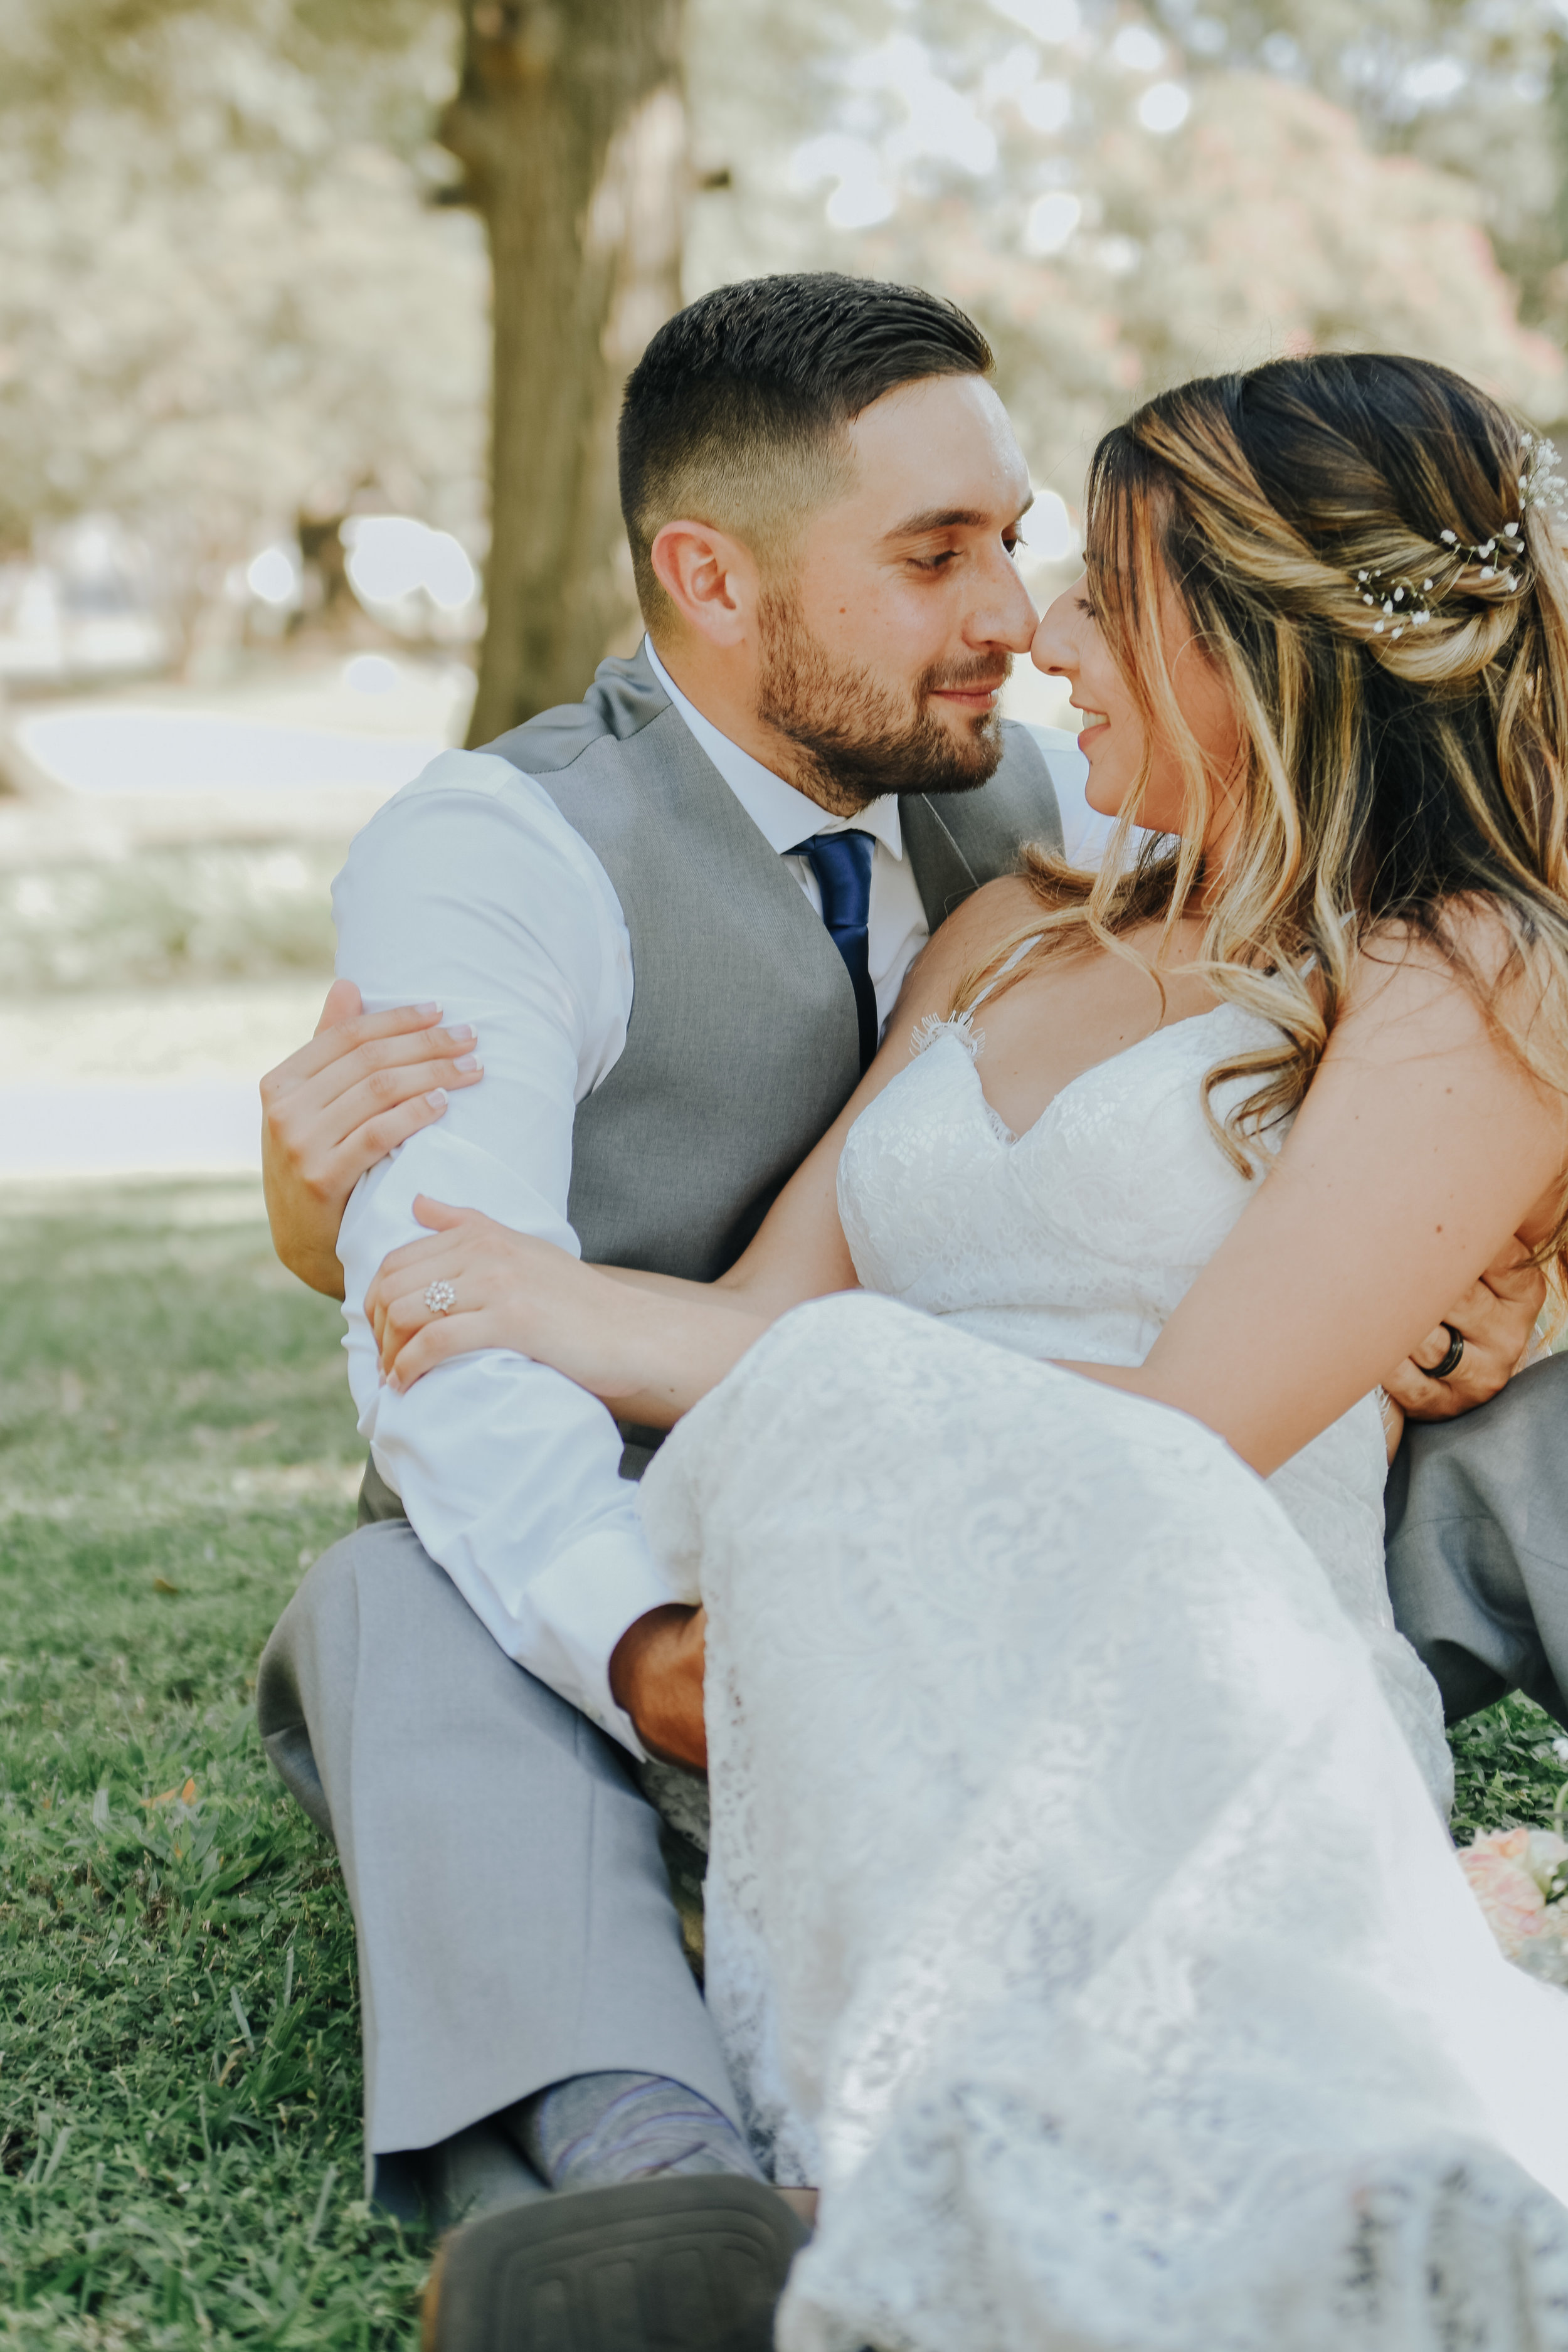  An image of a couple who just eloped, sitting in the grass, romantically embracing, touching noses and affectionately looking into each other’s eyes in Marshall Park by Vanessa Venable - Charlotte elopement photographer 